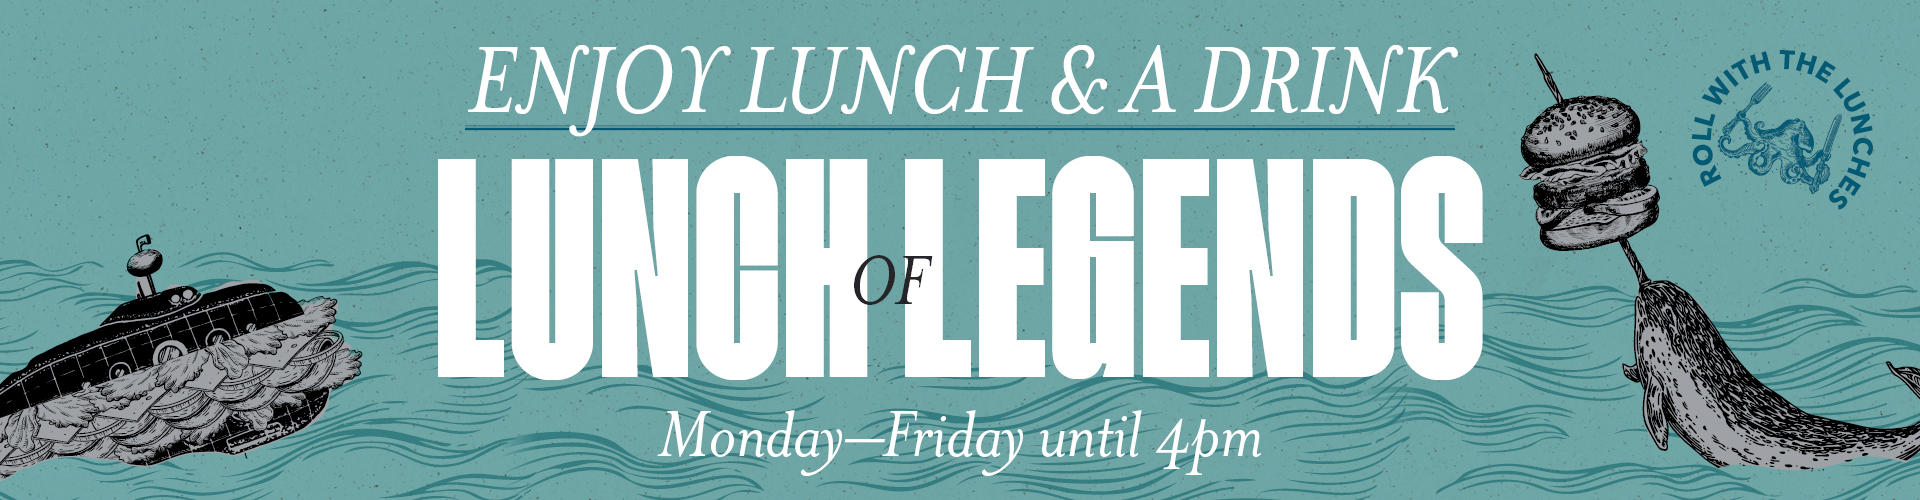 Lunch and a drink offers in London | The Long Acre